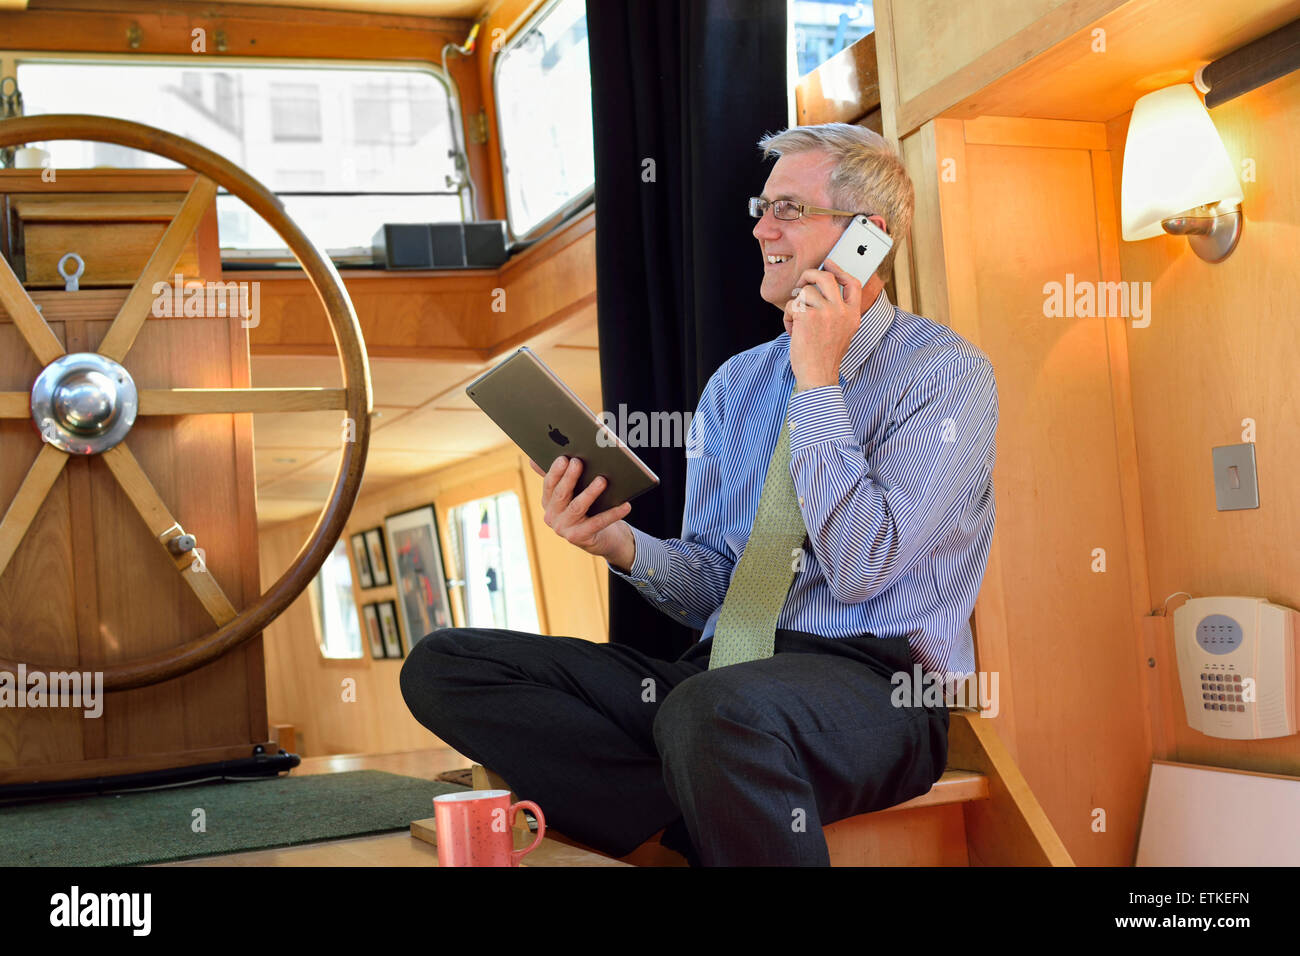 Relaxed mature businessman in houseboat office holding his iPad air tablet computer screen and using his iPhone 6 smartphone Stock Photo